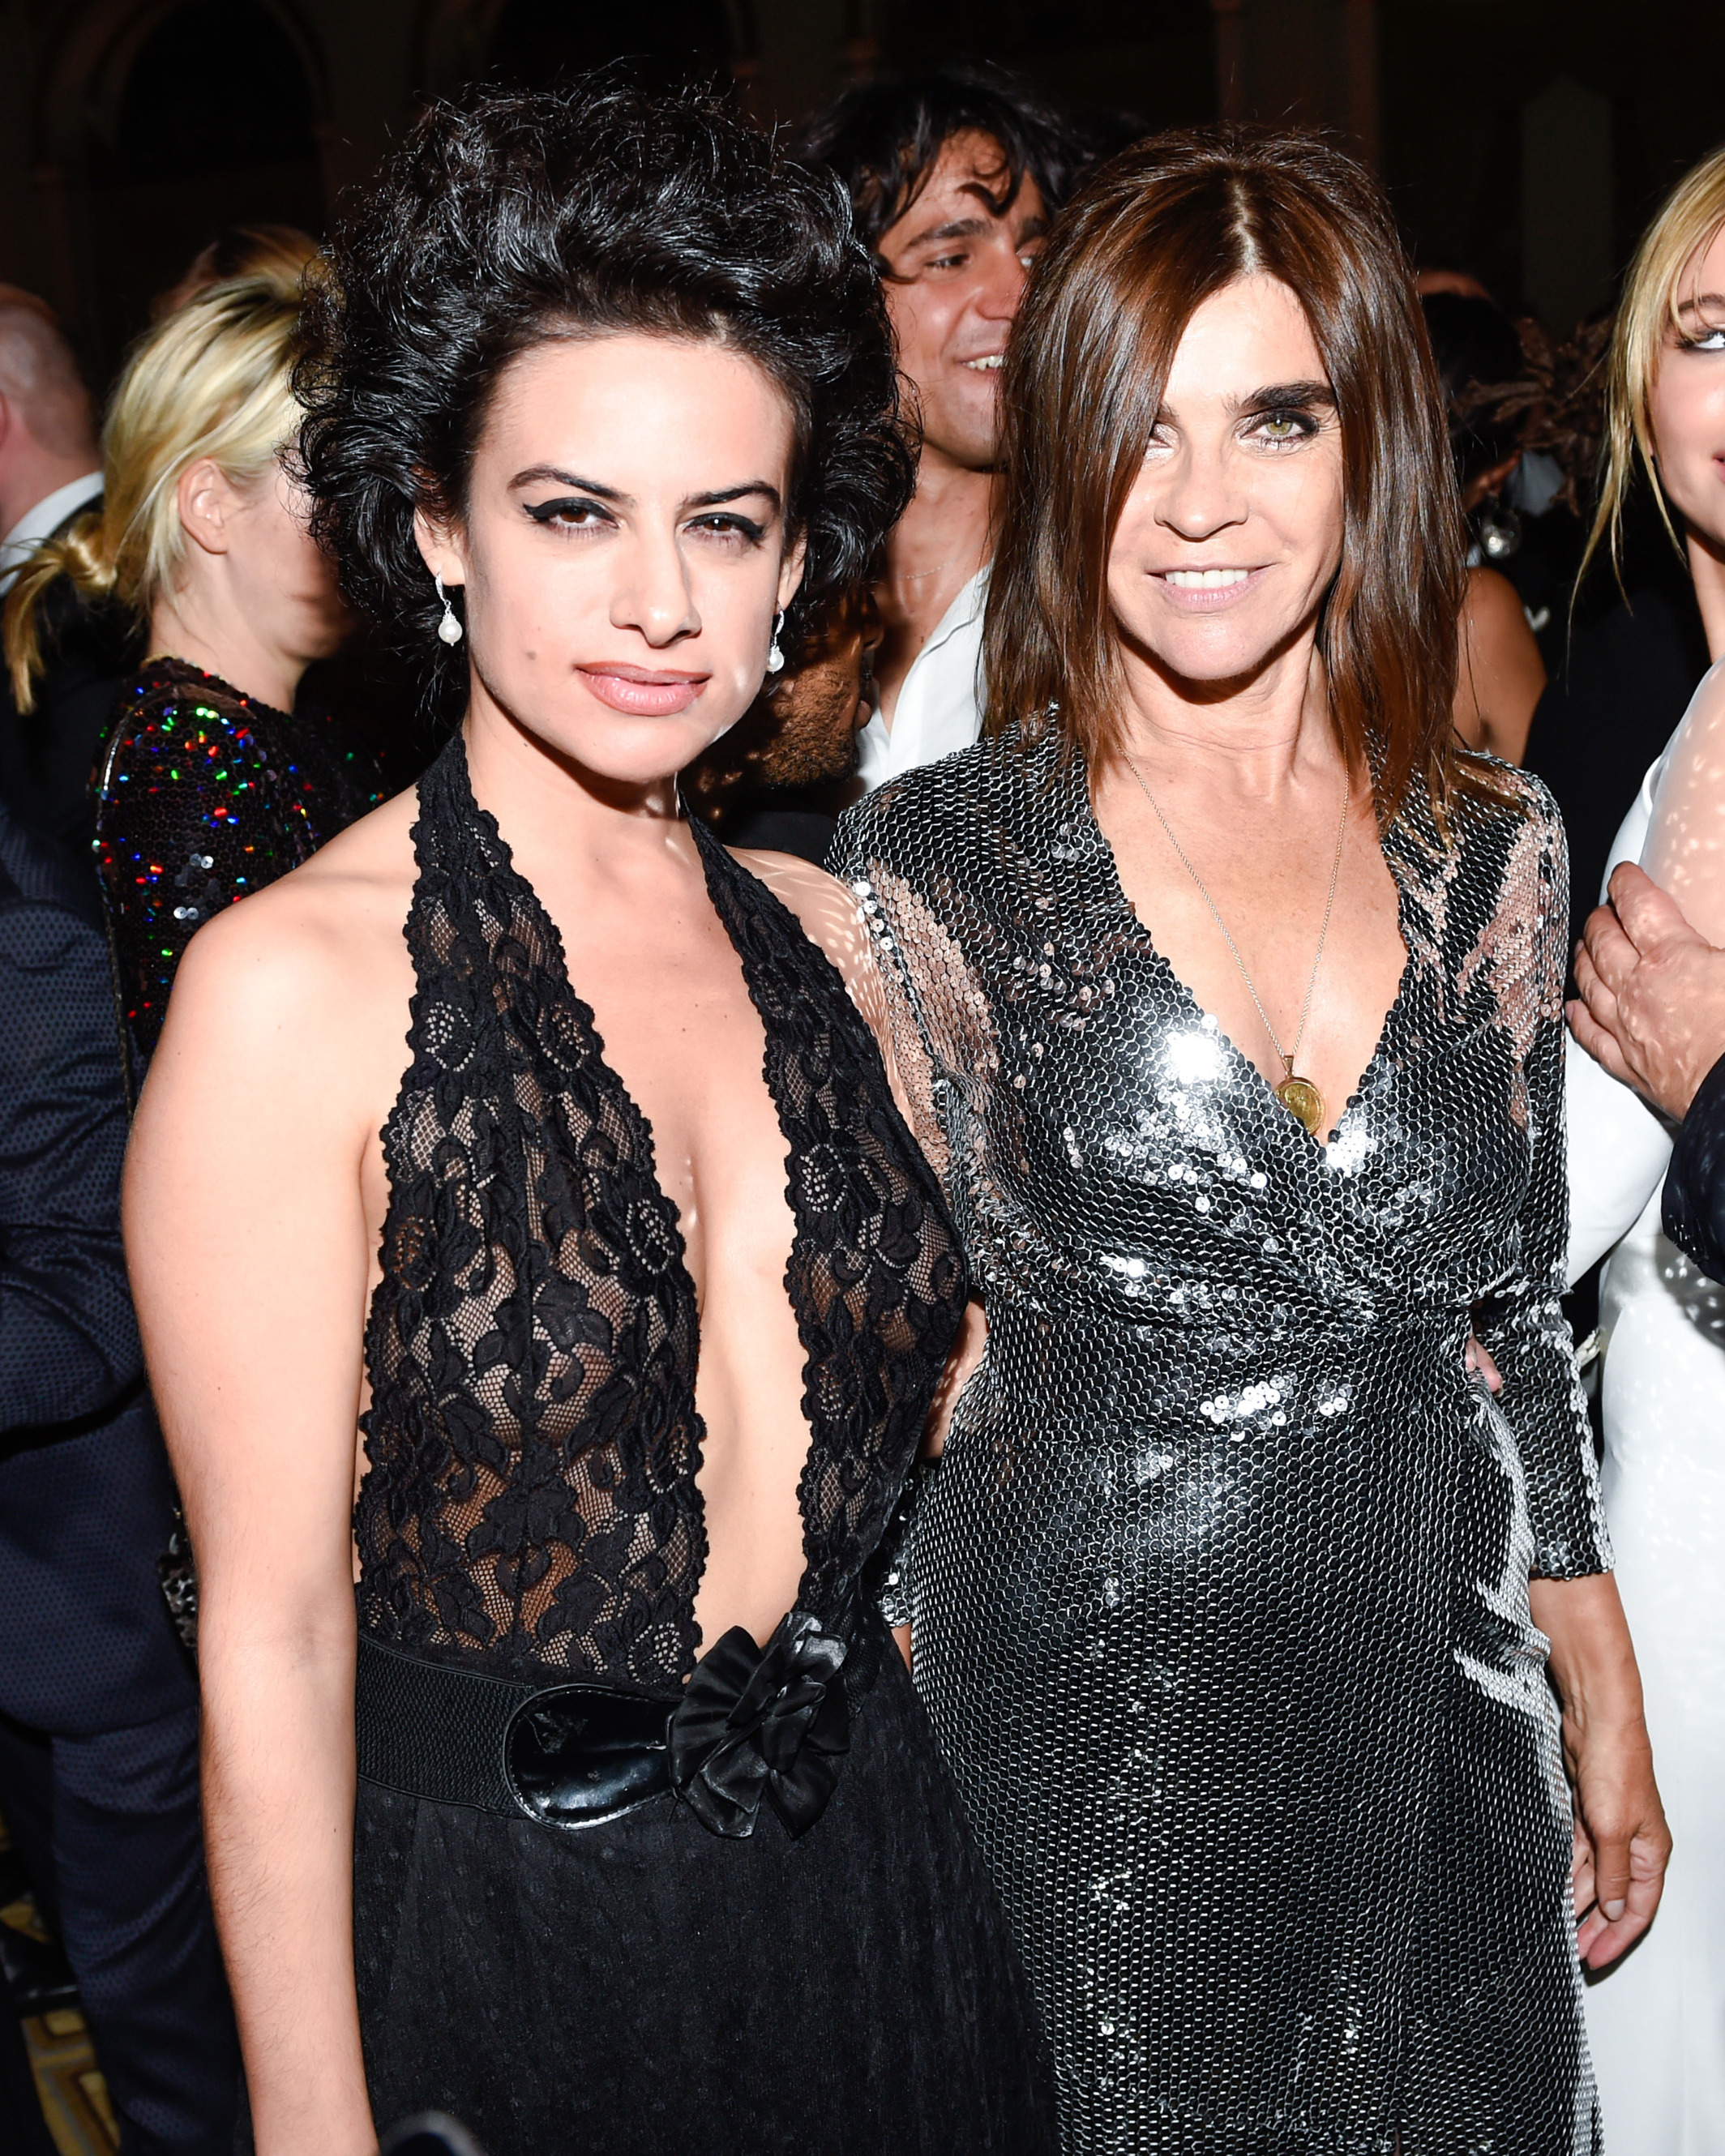 Carine Roitfeld and Elena Levon attend the 2015 Harper's BAZAAR ICONS Event at The Plaza Hotel on September 16, 2015 in New York City.